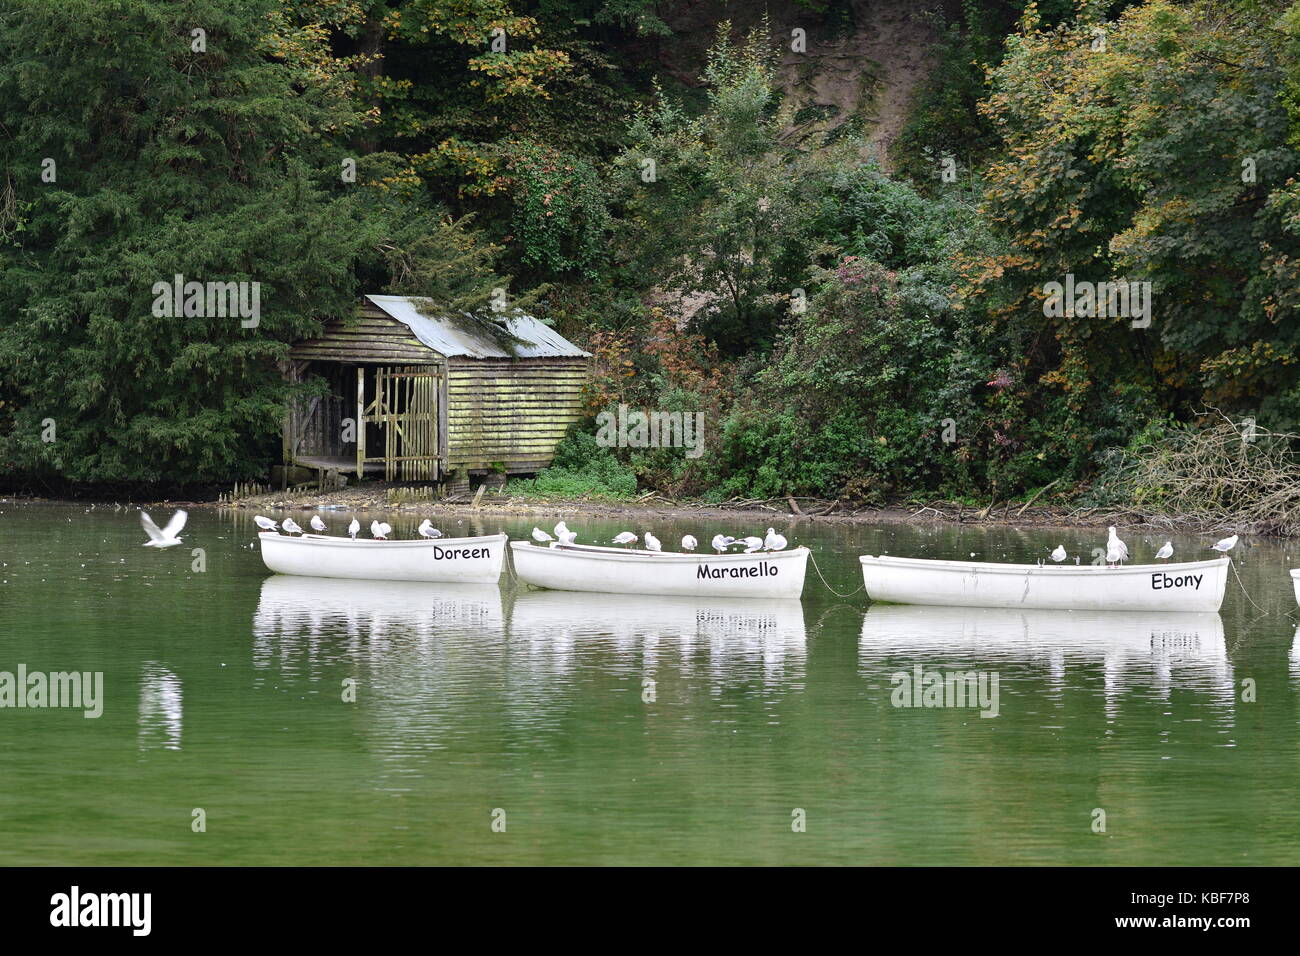 Arundel, West Sussex, England, UK. 29th Sep, 2017. UK Weather. Boats on Swanbourne Lake in Arundel this afternoon, as the earlier rain has stopped for now, but the sky is still covered in cloud. Credit: Geoff Smith/Alamy Live News Stock Photo